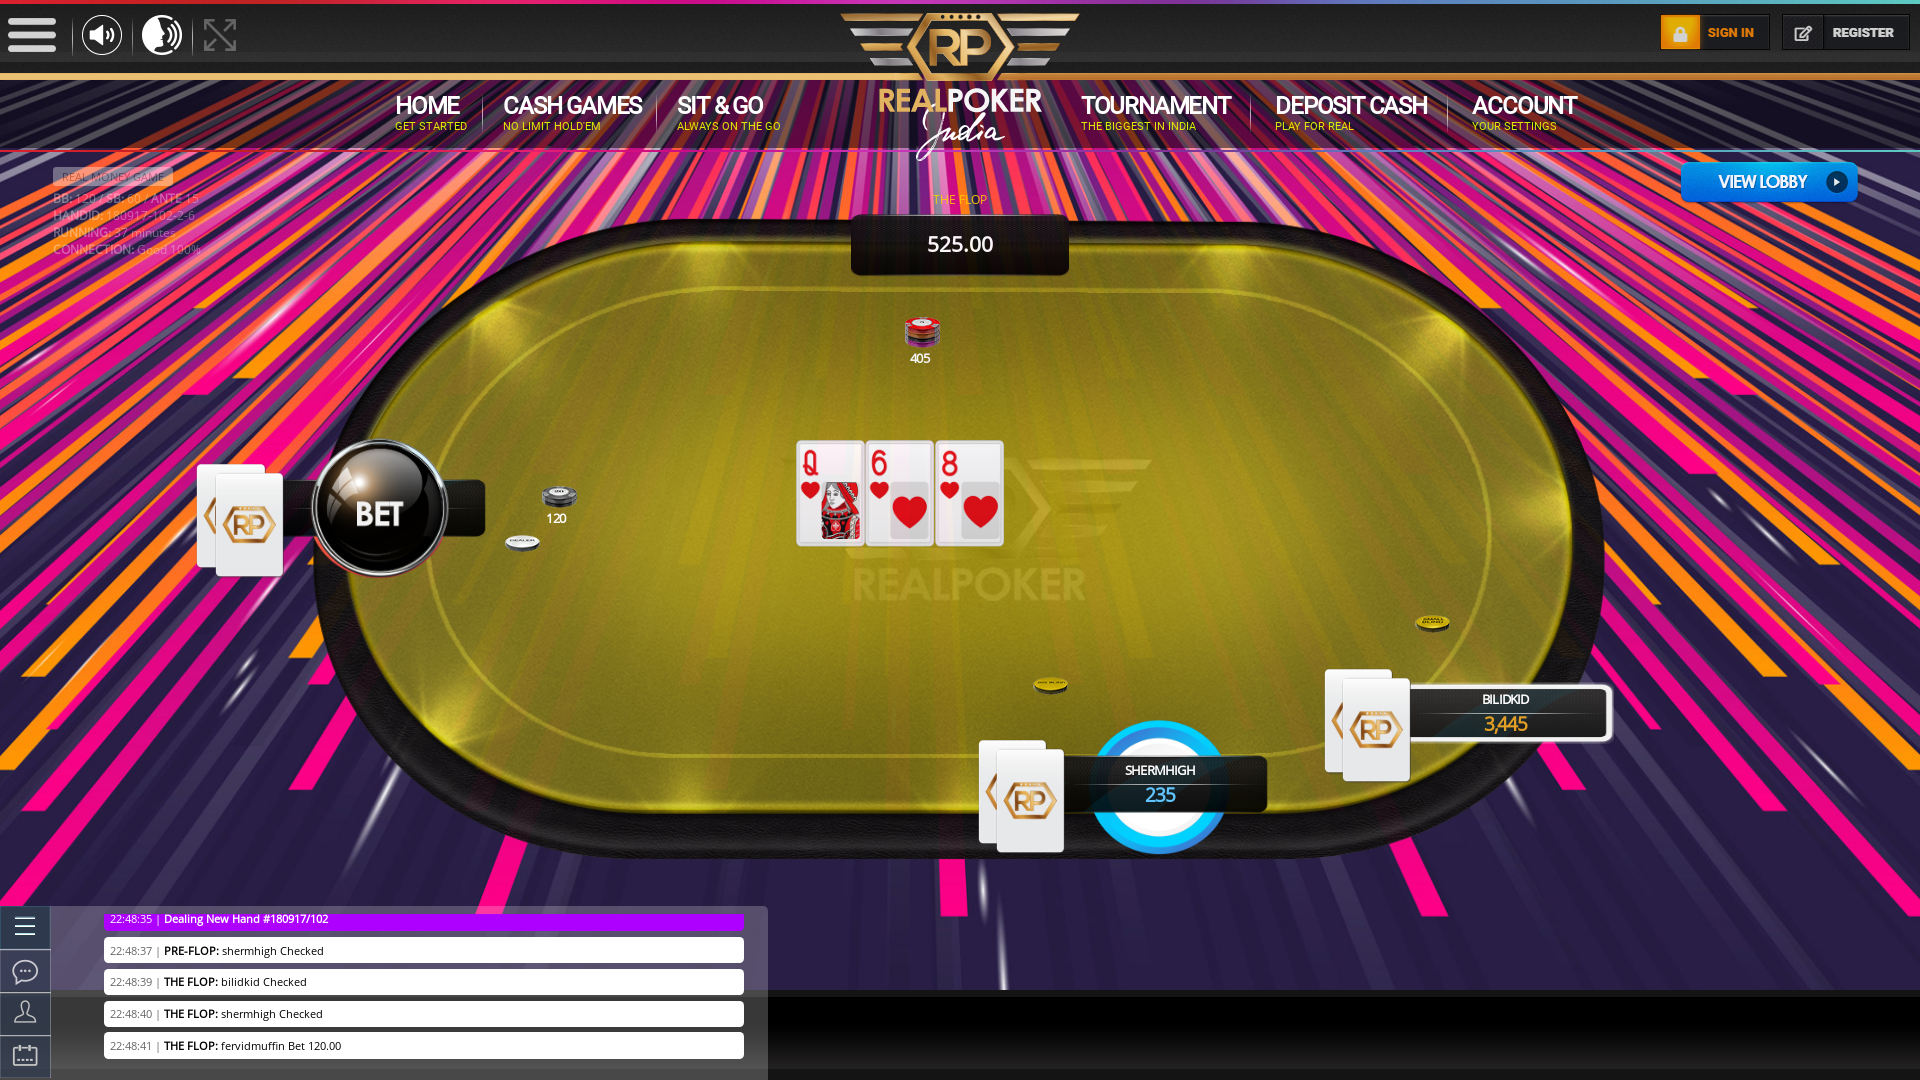 Online poker on a 10 player table in the 37th minute match up